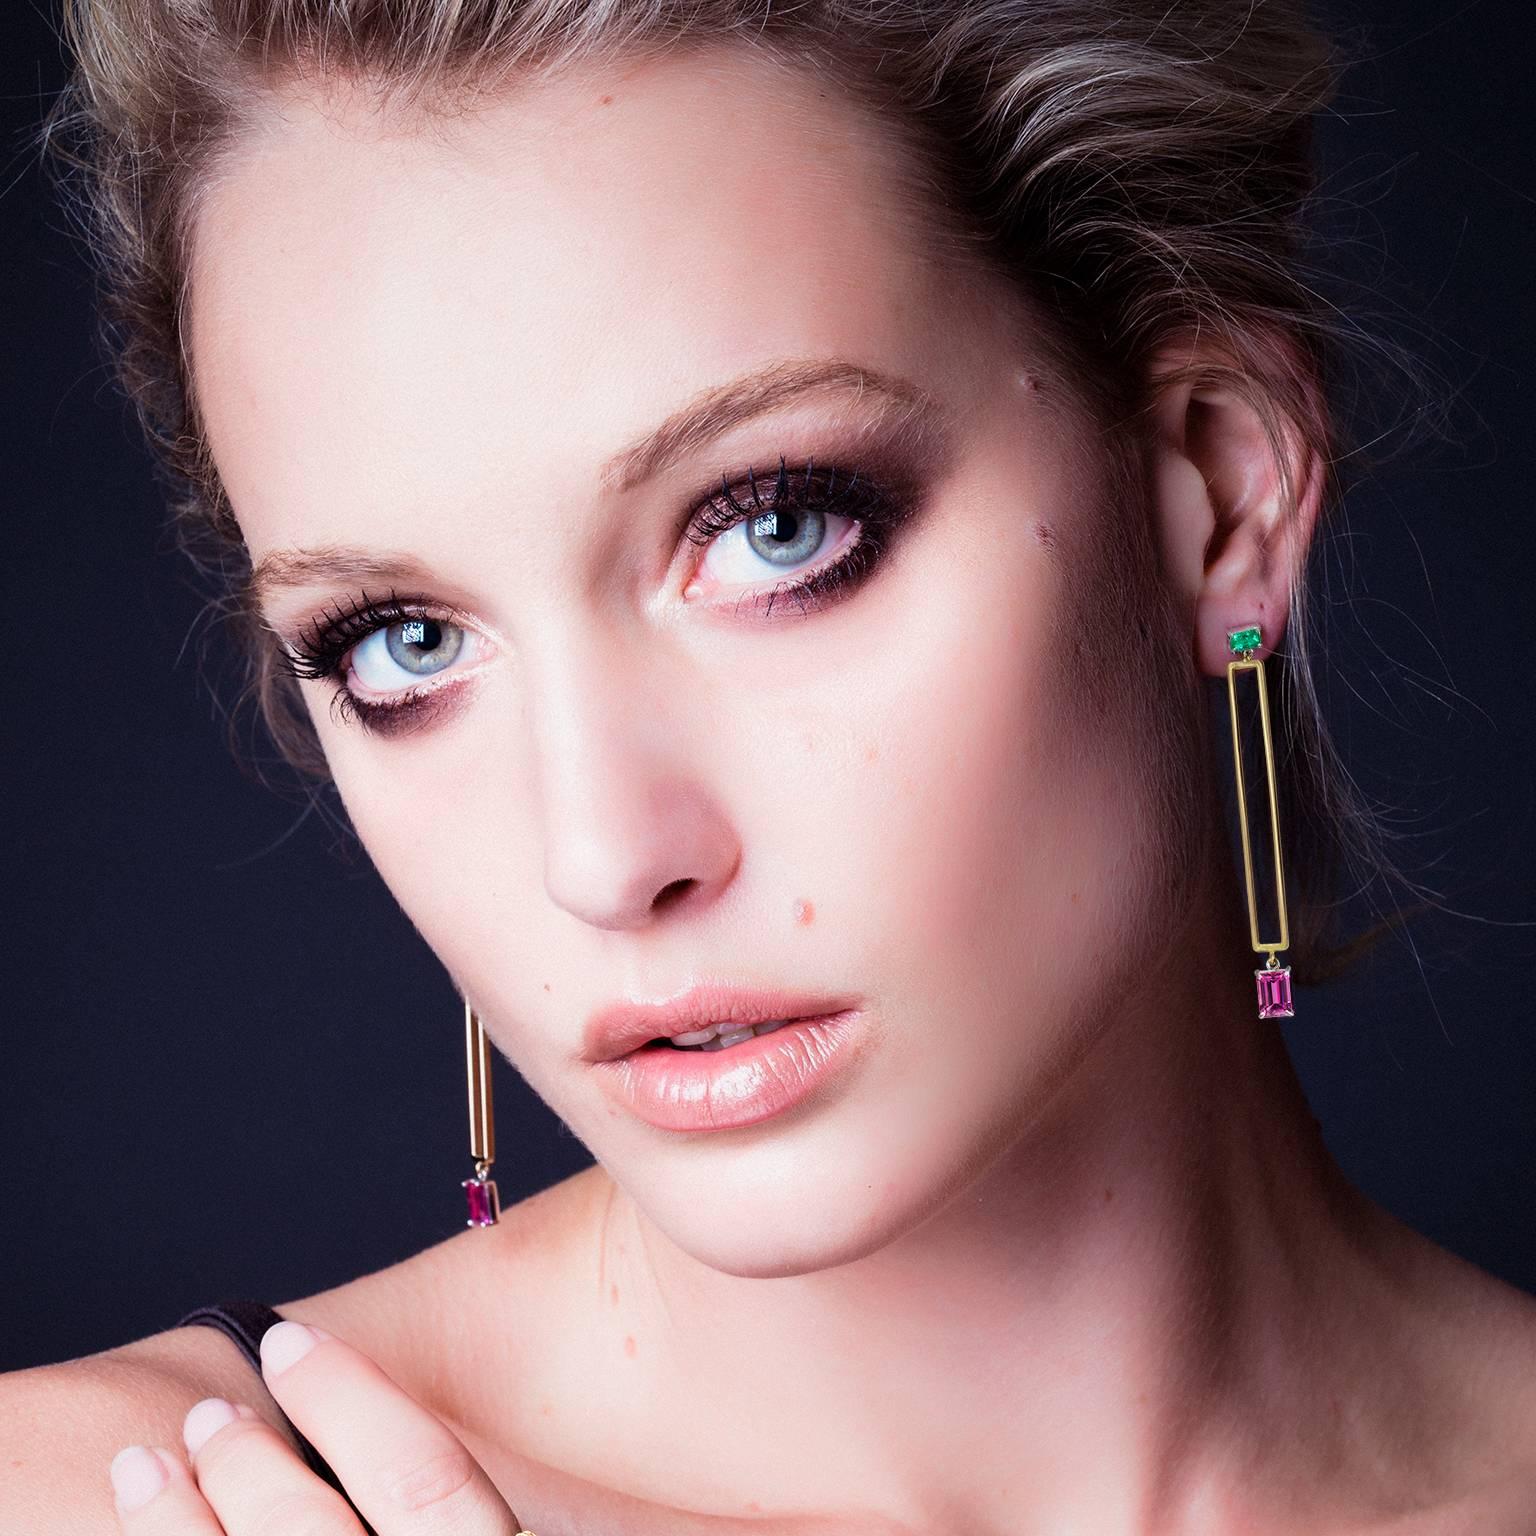 These elegant drop earrings' design was inspired by Manhattan's Art Deco skyscrapers. Handmade in Sydney in 18 karat white and yellow gold and featuring bright, clear Colombian emeralds and pink spinels, these stunning earrings are elegant and